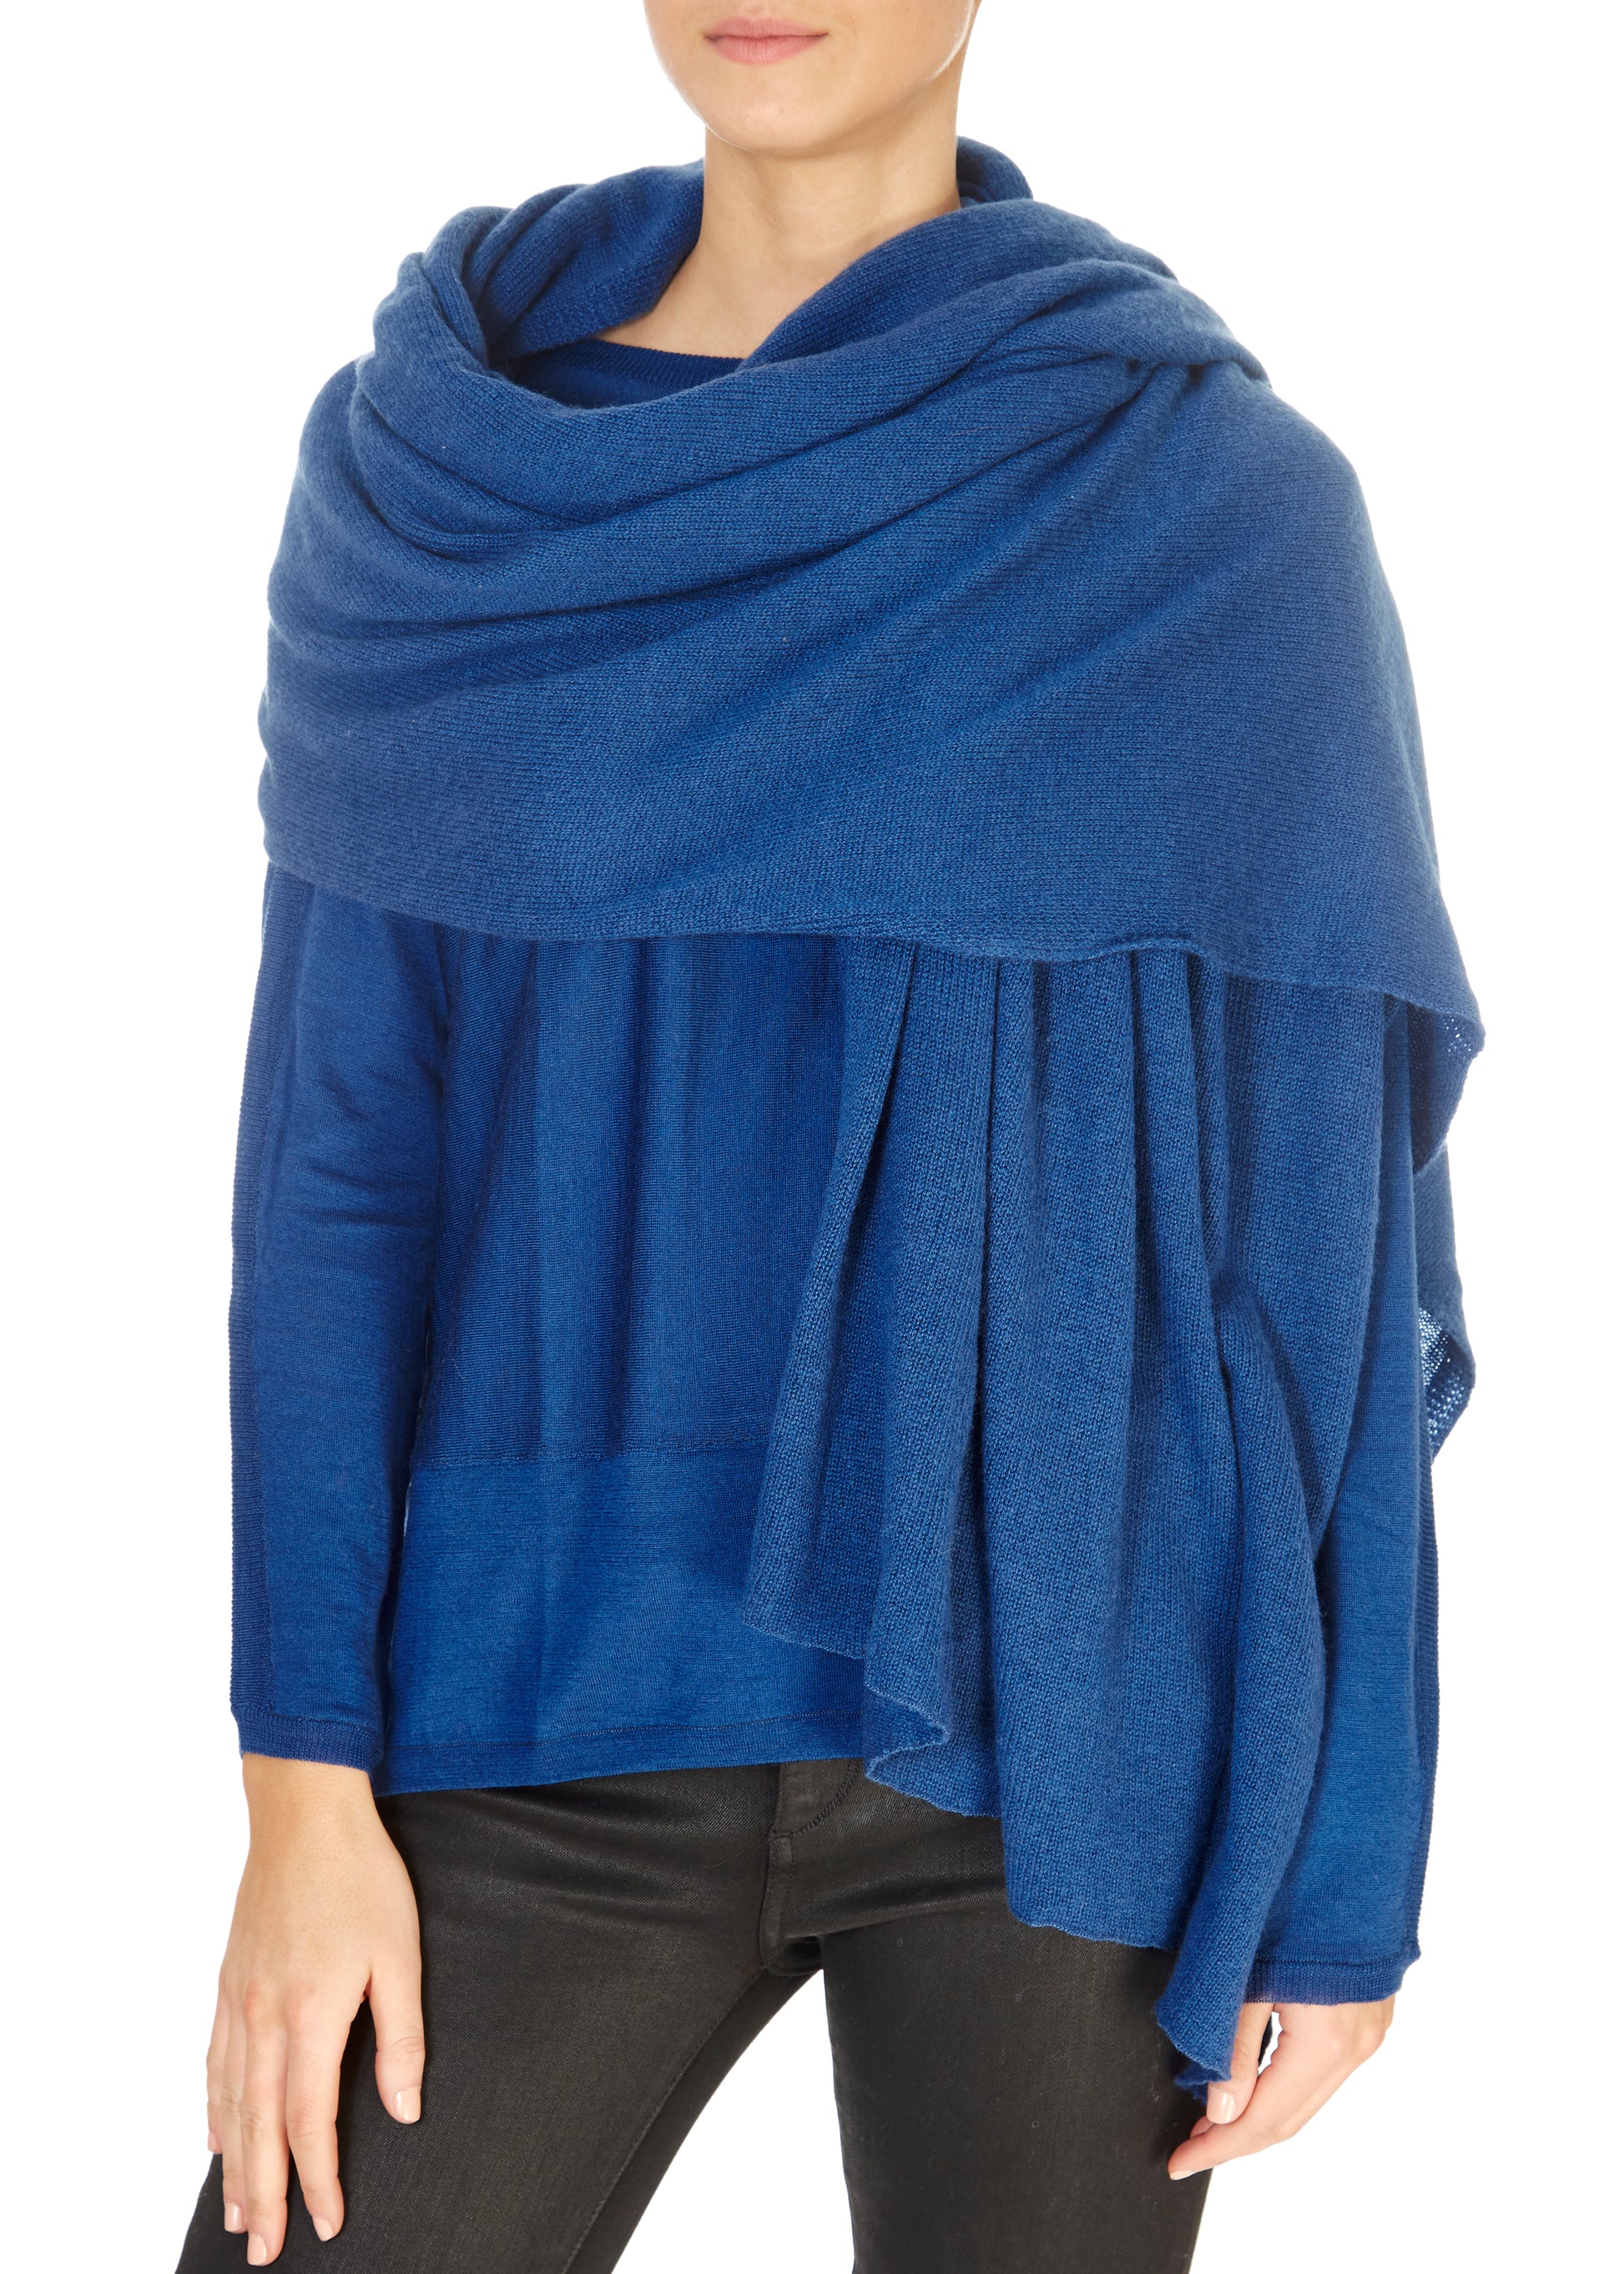 Teal Blue Cashmere Scarf and Wrap - Jessimara